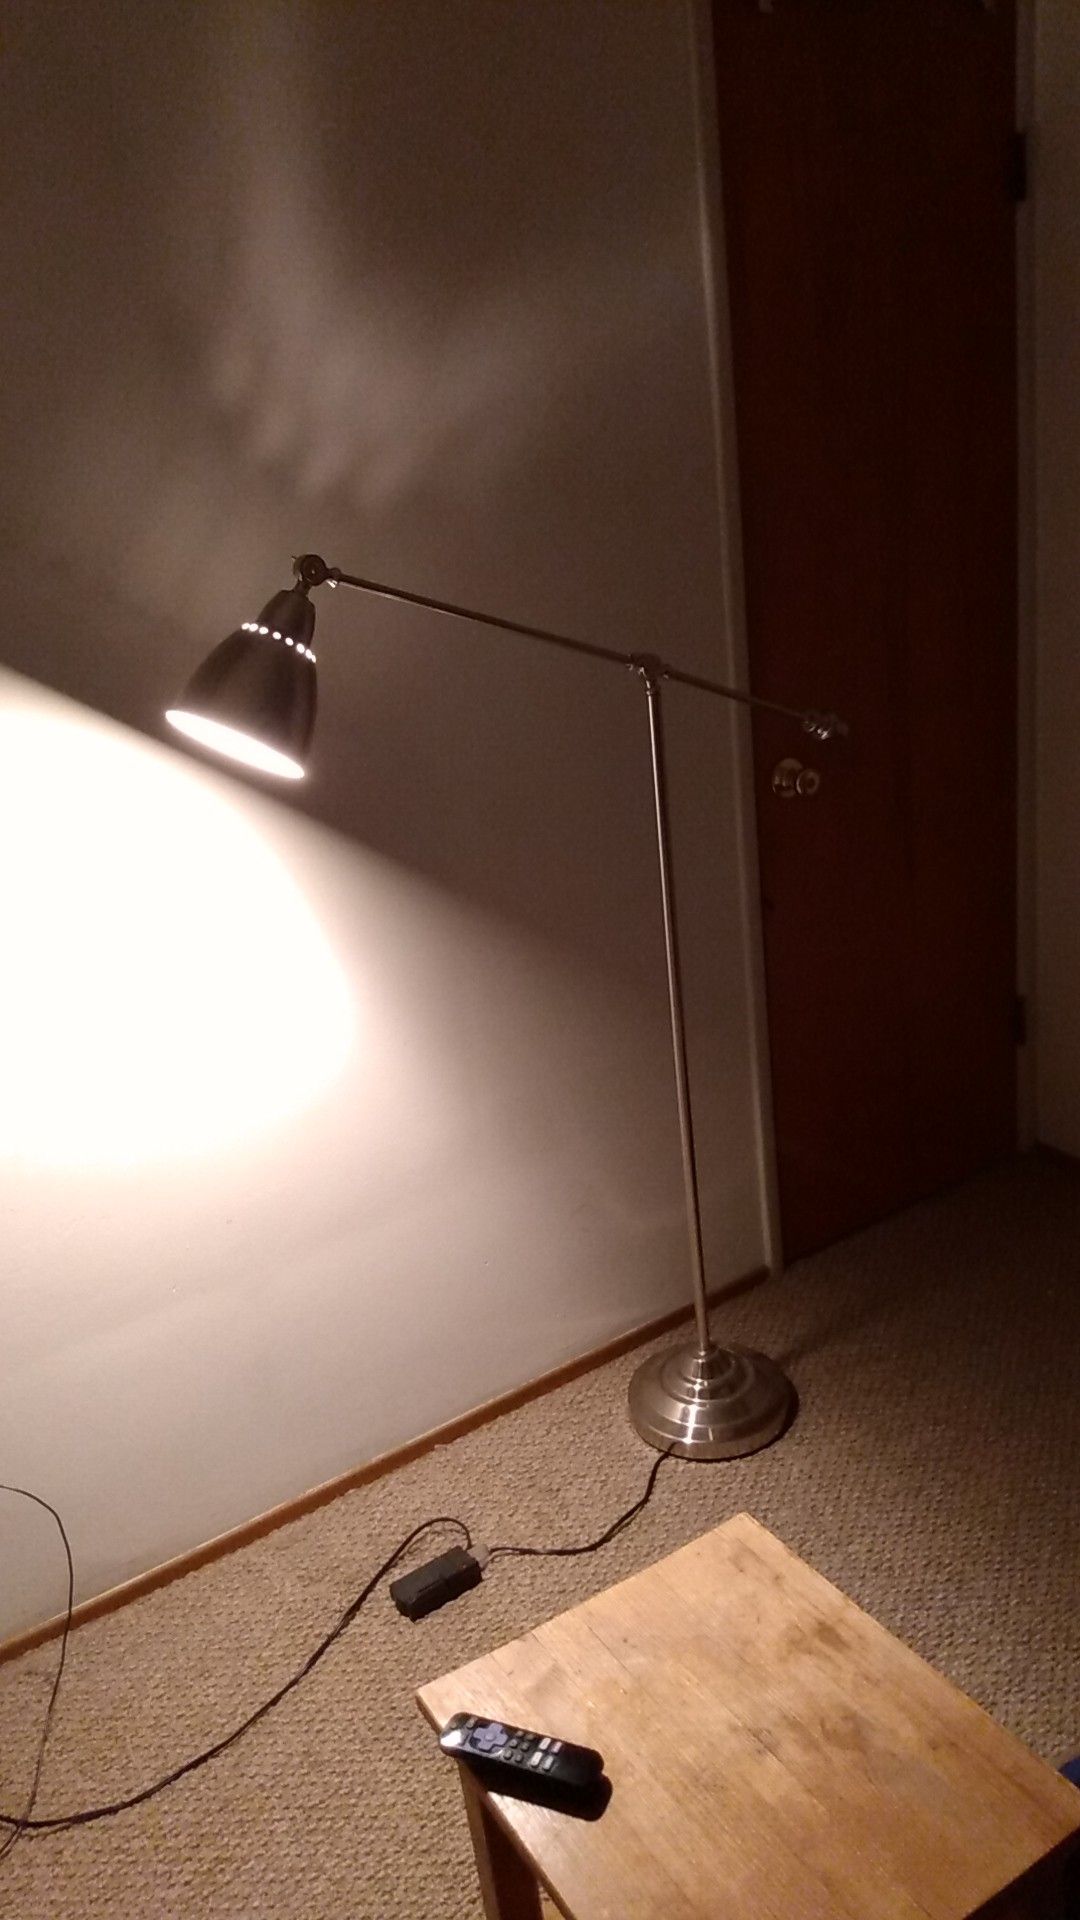 Stainless steal floor/reading lamp